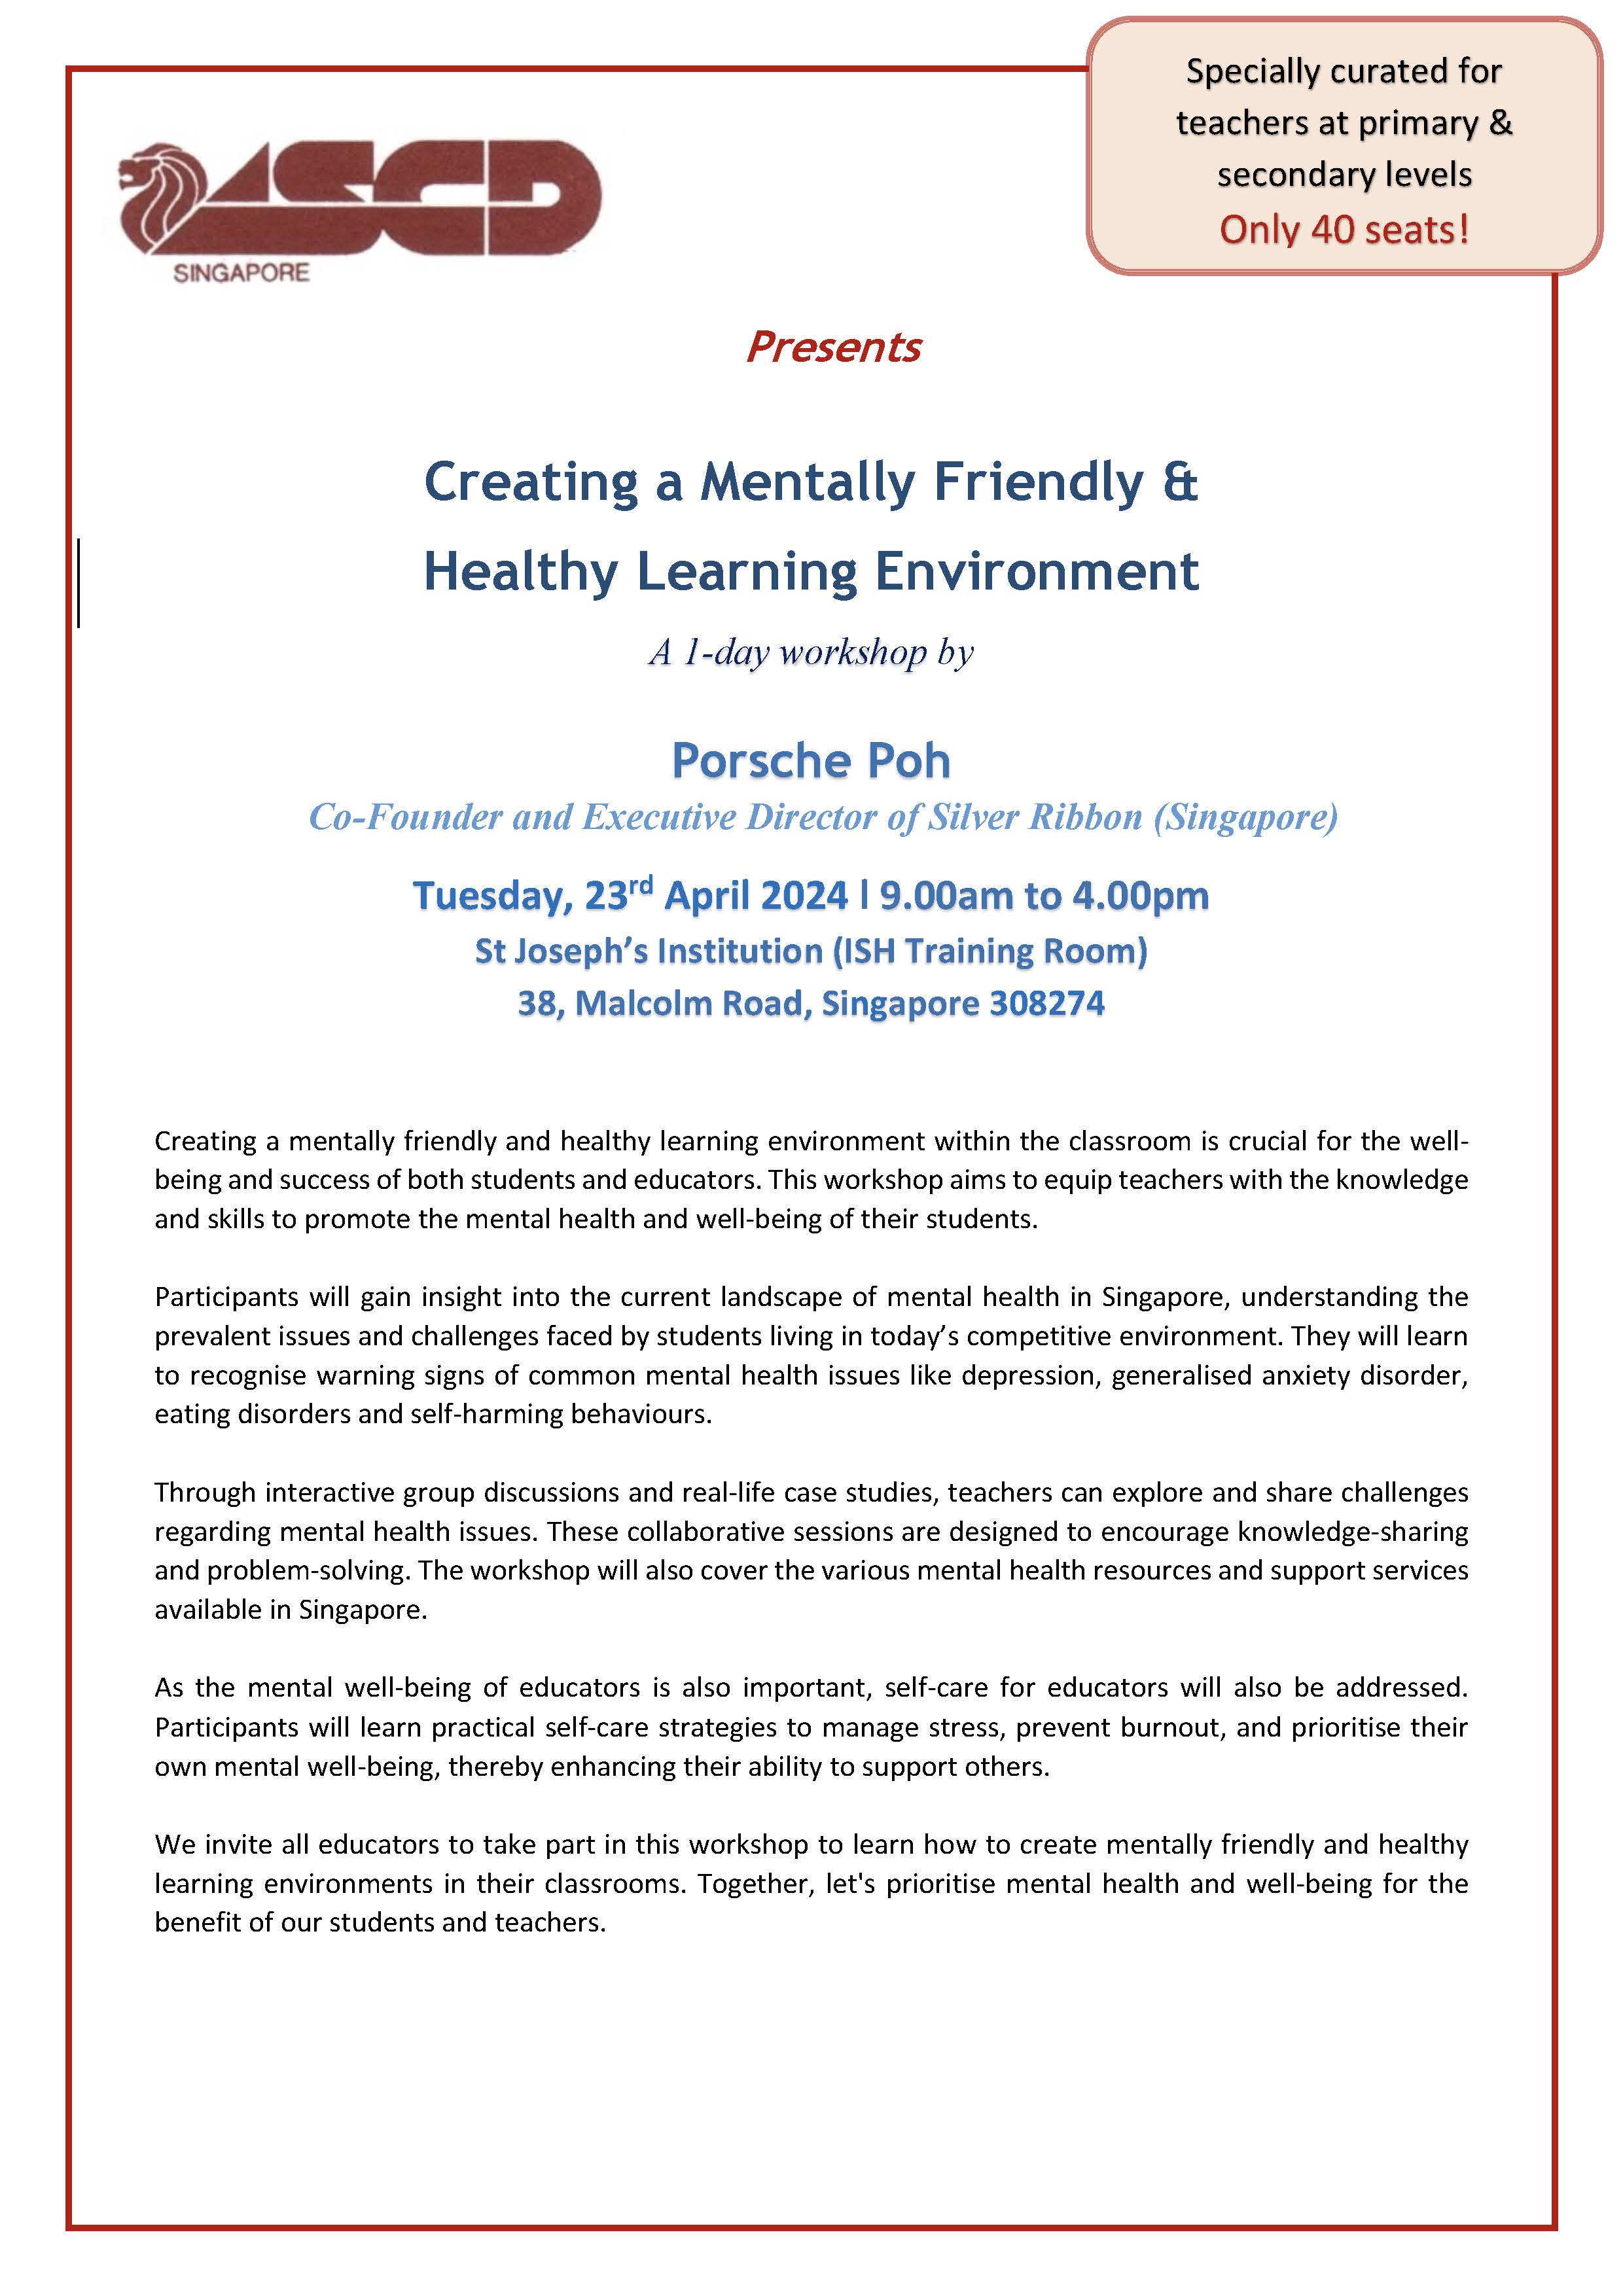 2024-04-23 Creating a Mentally Friendly & Healthy Learning Environment Workshop_Page_1.jpg